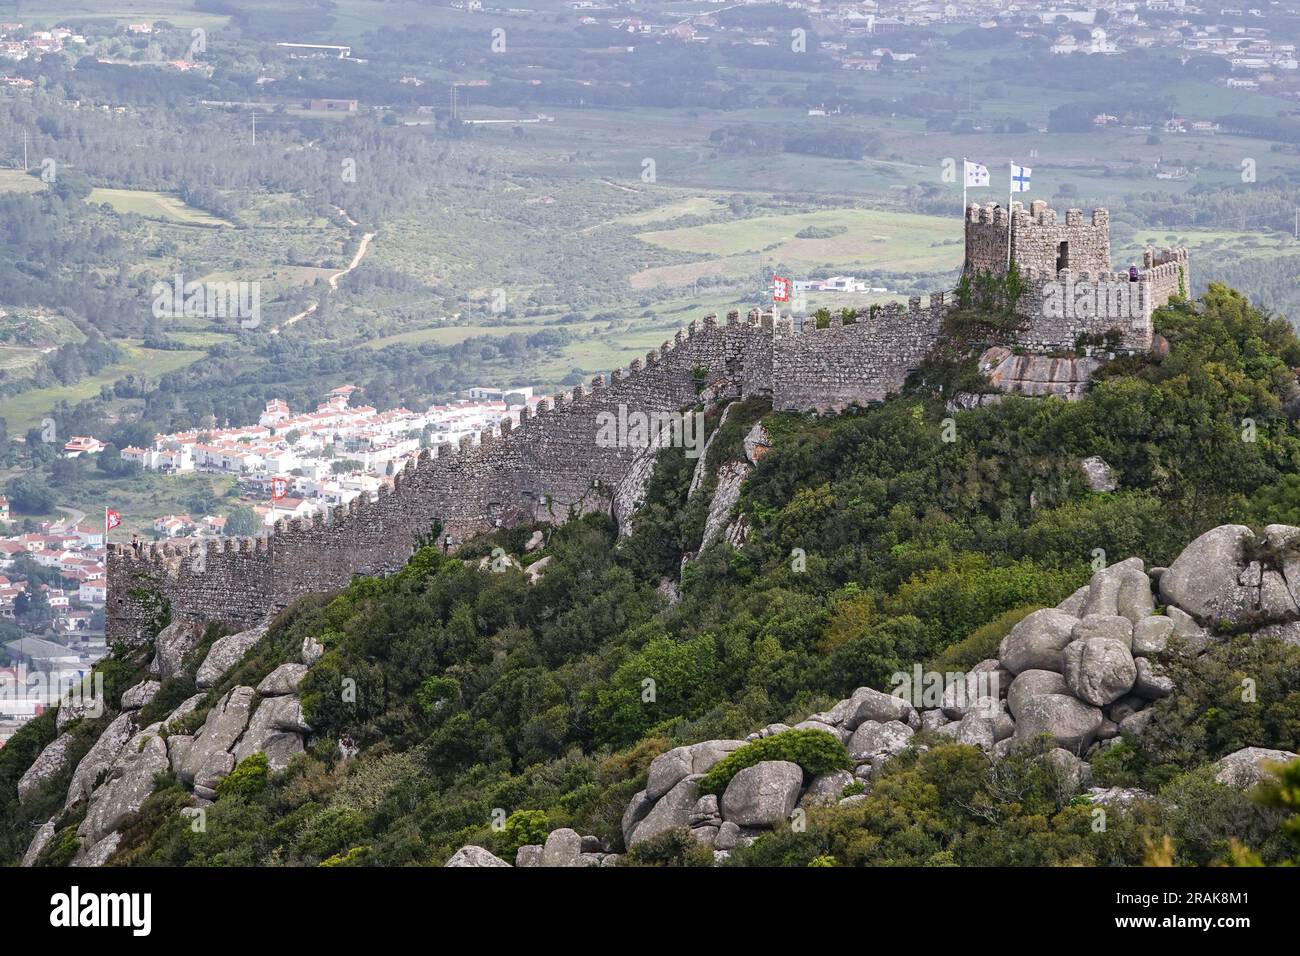 The Castelo dos Mouros, or Castle of the Moors on the Sintra Hills above the historic town of Sintra, Portugal. The medieval castle built during the Moorish occupation in the 8th century dominates the hillside over Sintra. Stock Photo